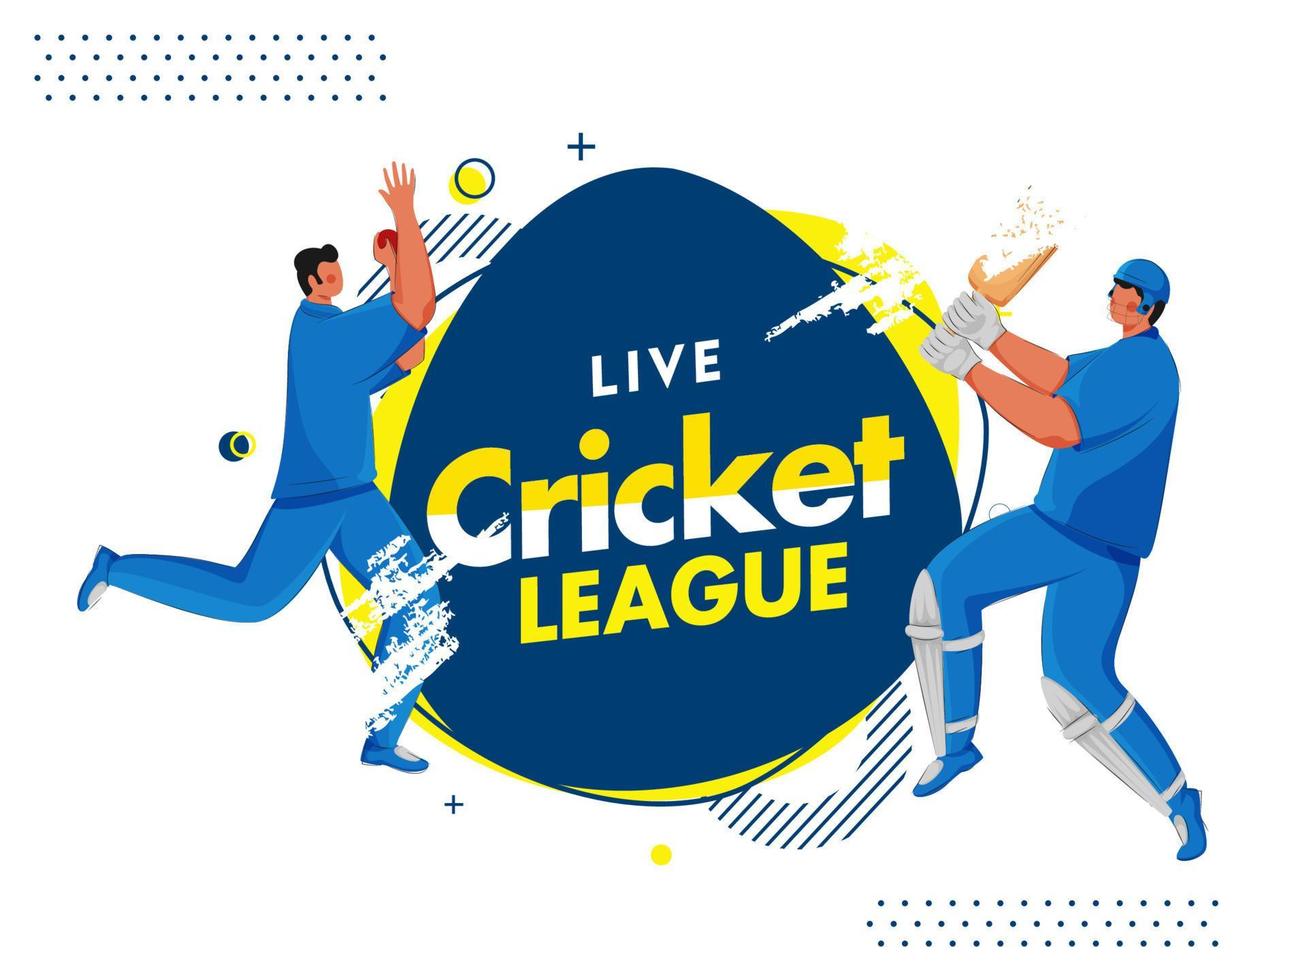 Live Cricket League Poster Design with Cartoon Batsman and Bowler in Playing Pose on Abstract Background. vector